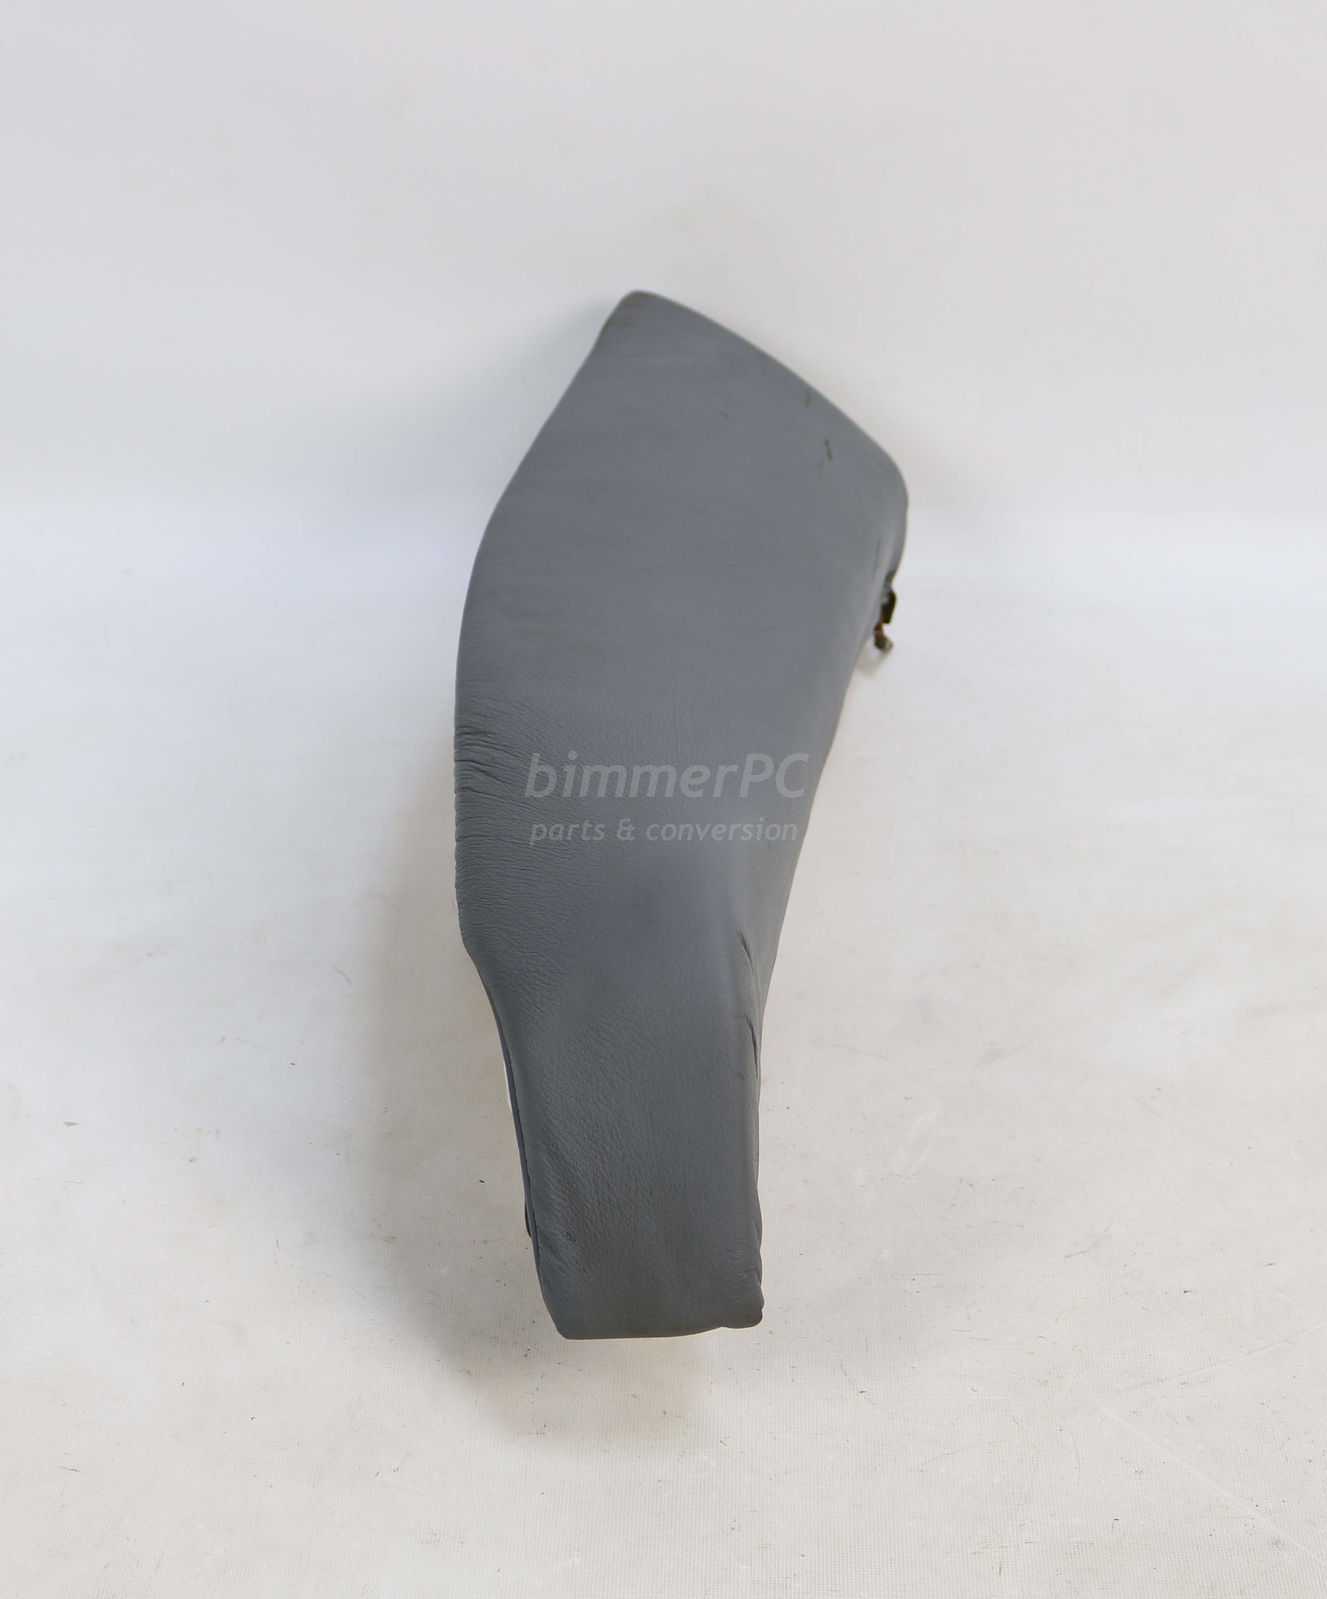 Picture of BMW 52208197289 Left Rear Seat Outer Bolster Cushion Gray Leather E38 750iL for sale